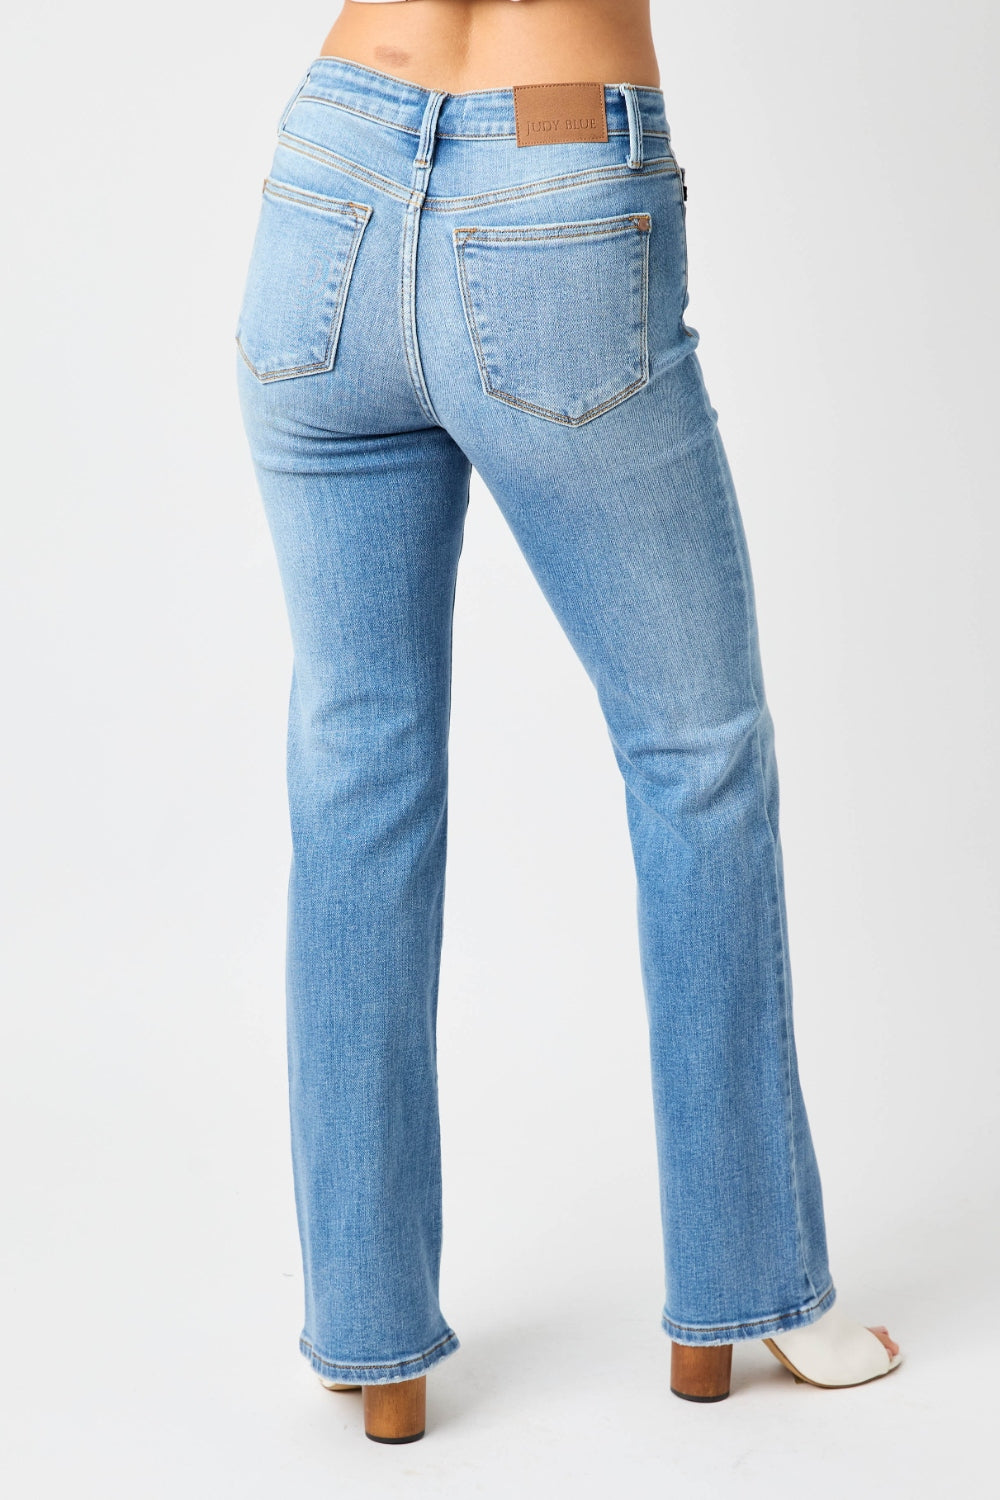 ONLINE ONLY! Judy Blue Full Size High Waist Straight Jeans